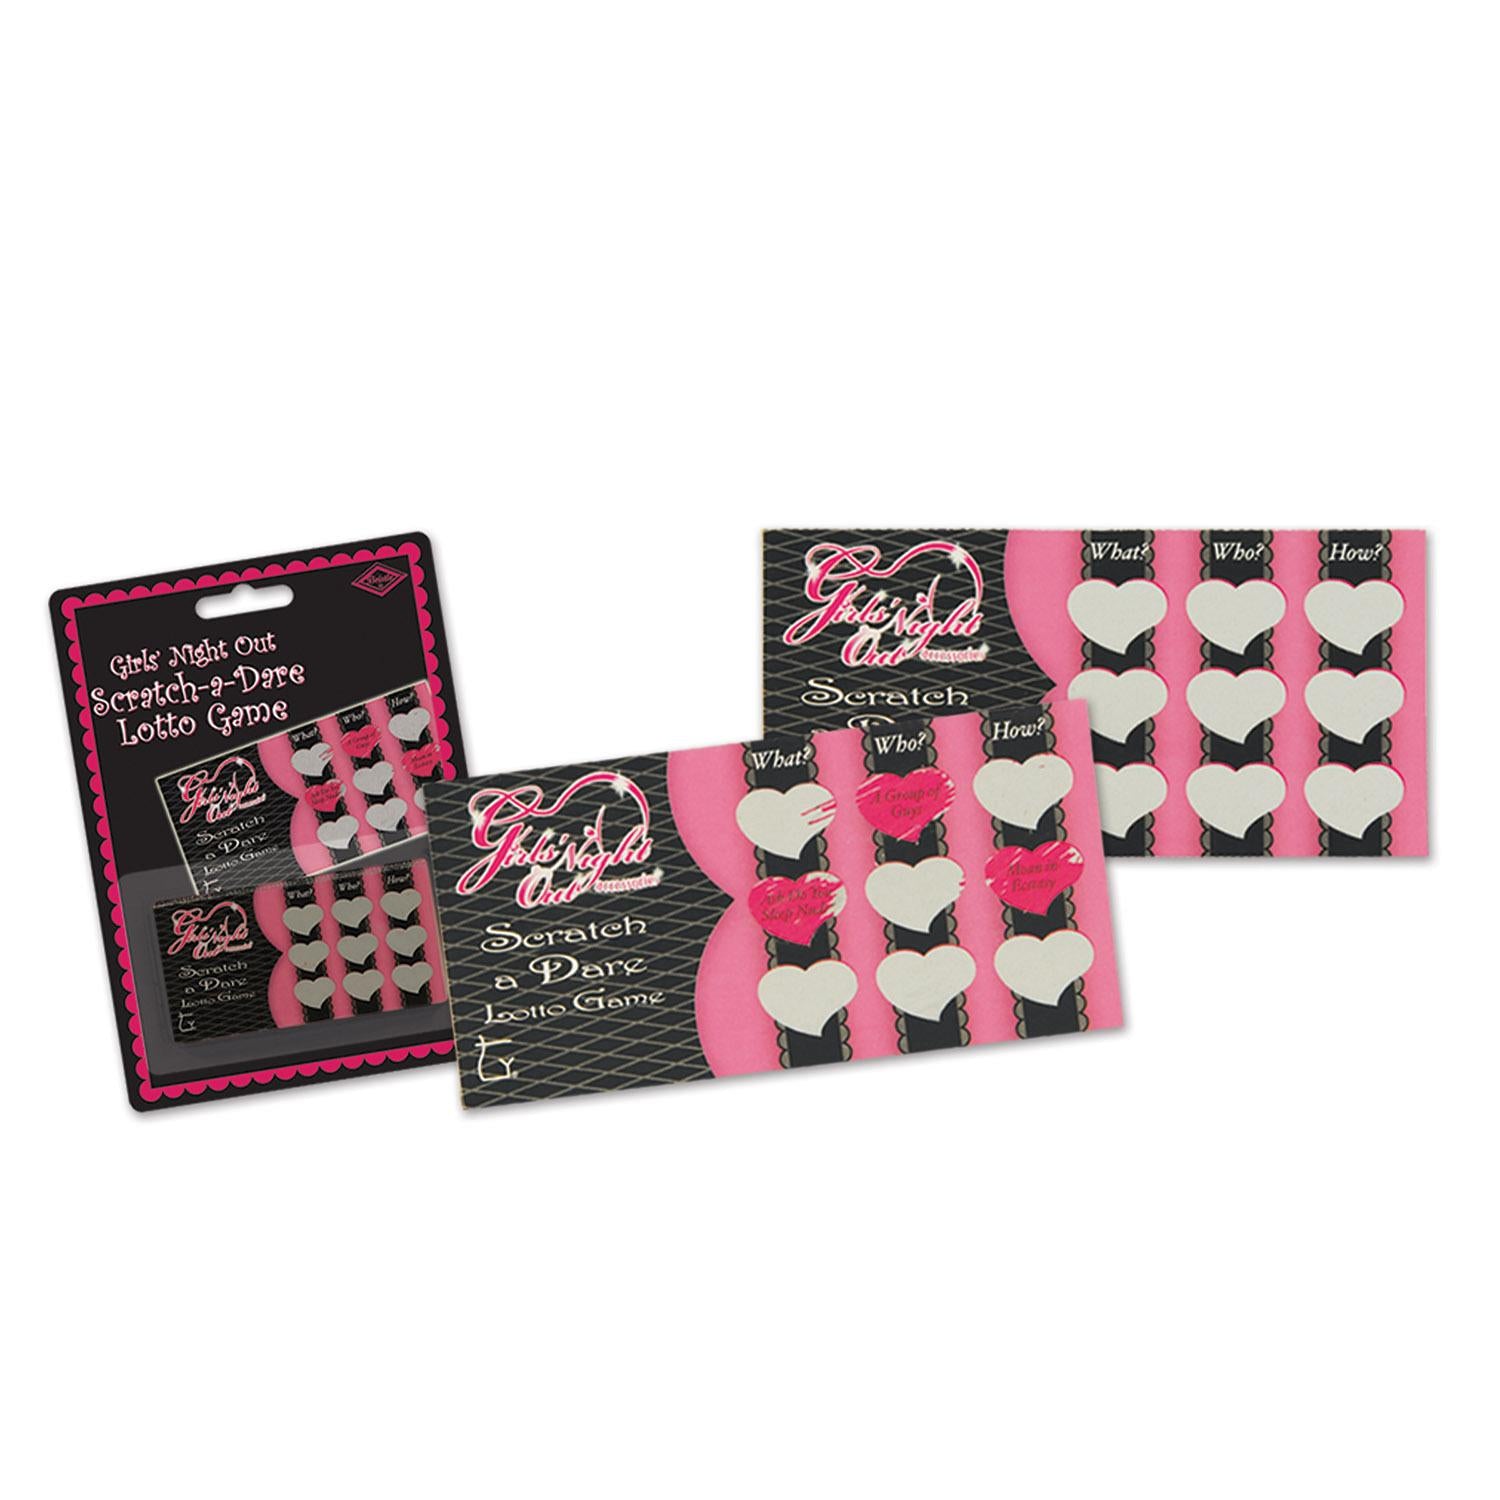 Bachelorette Party Girls' Night Out Scratch-A-Dare Game (144/Case)